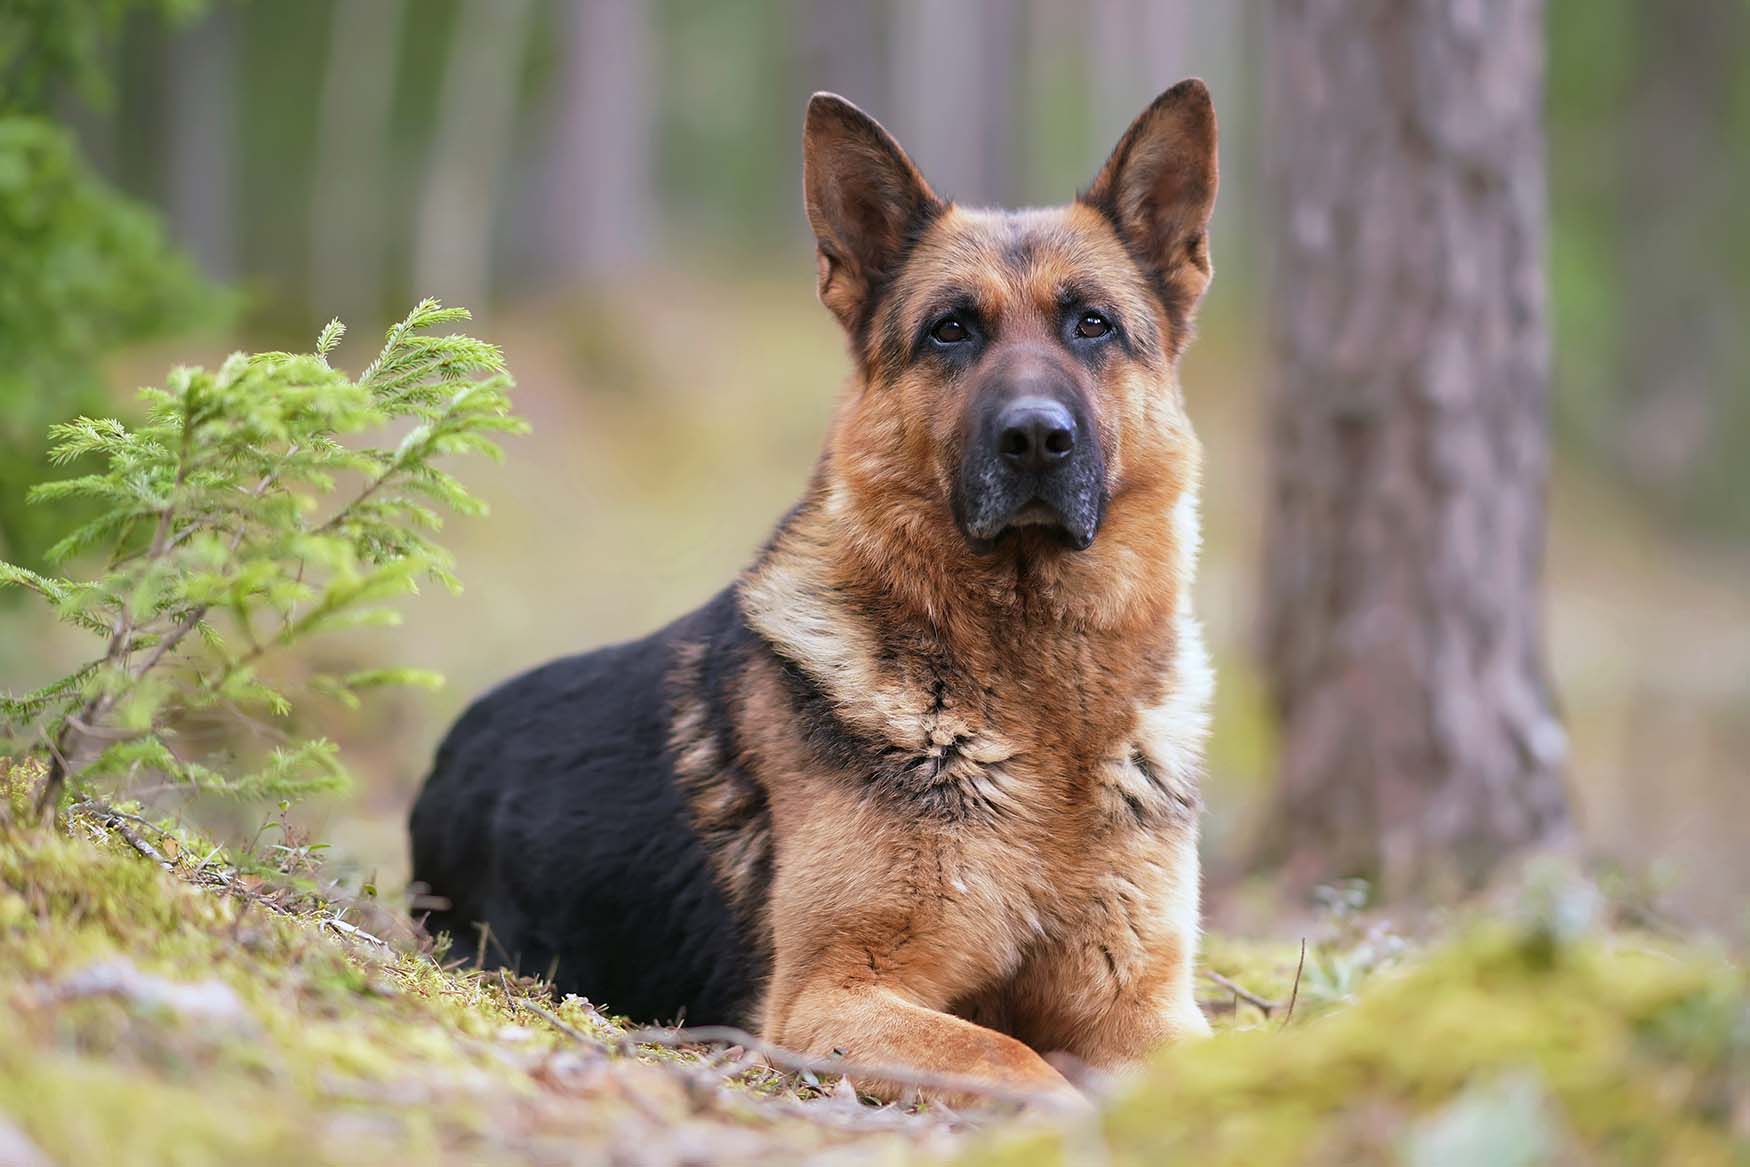 A German Shepherd lying down in a forest setting with blurred trees in the background.